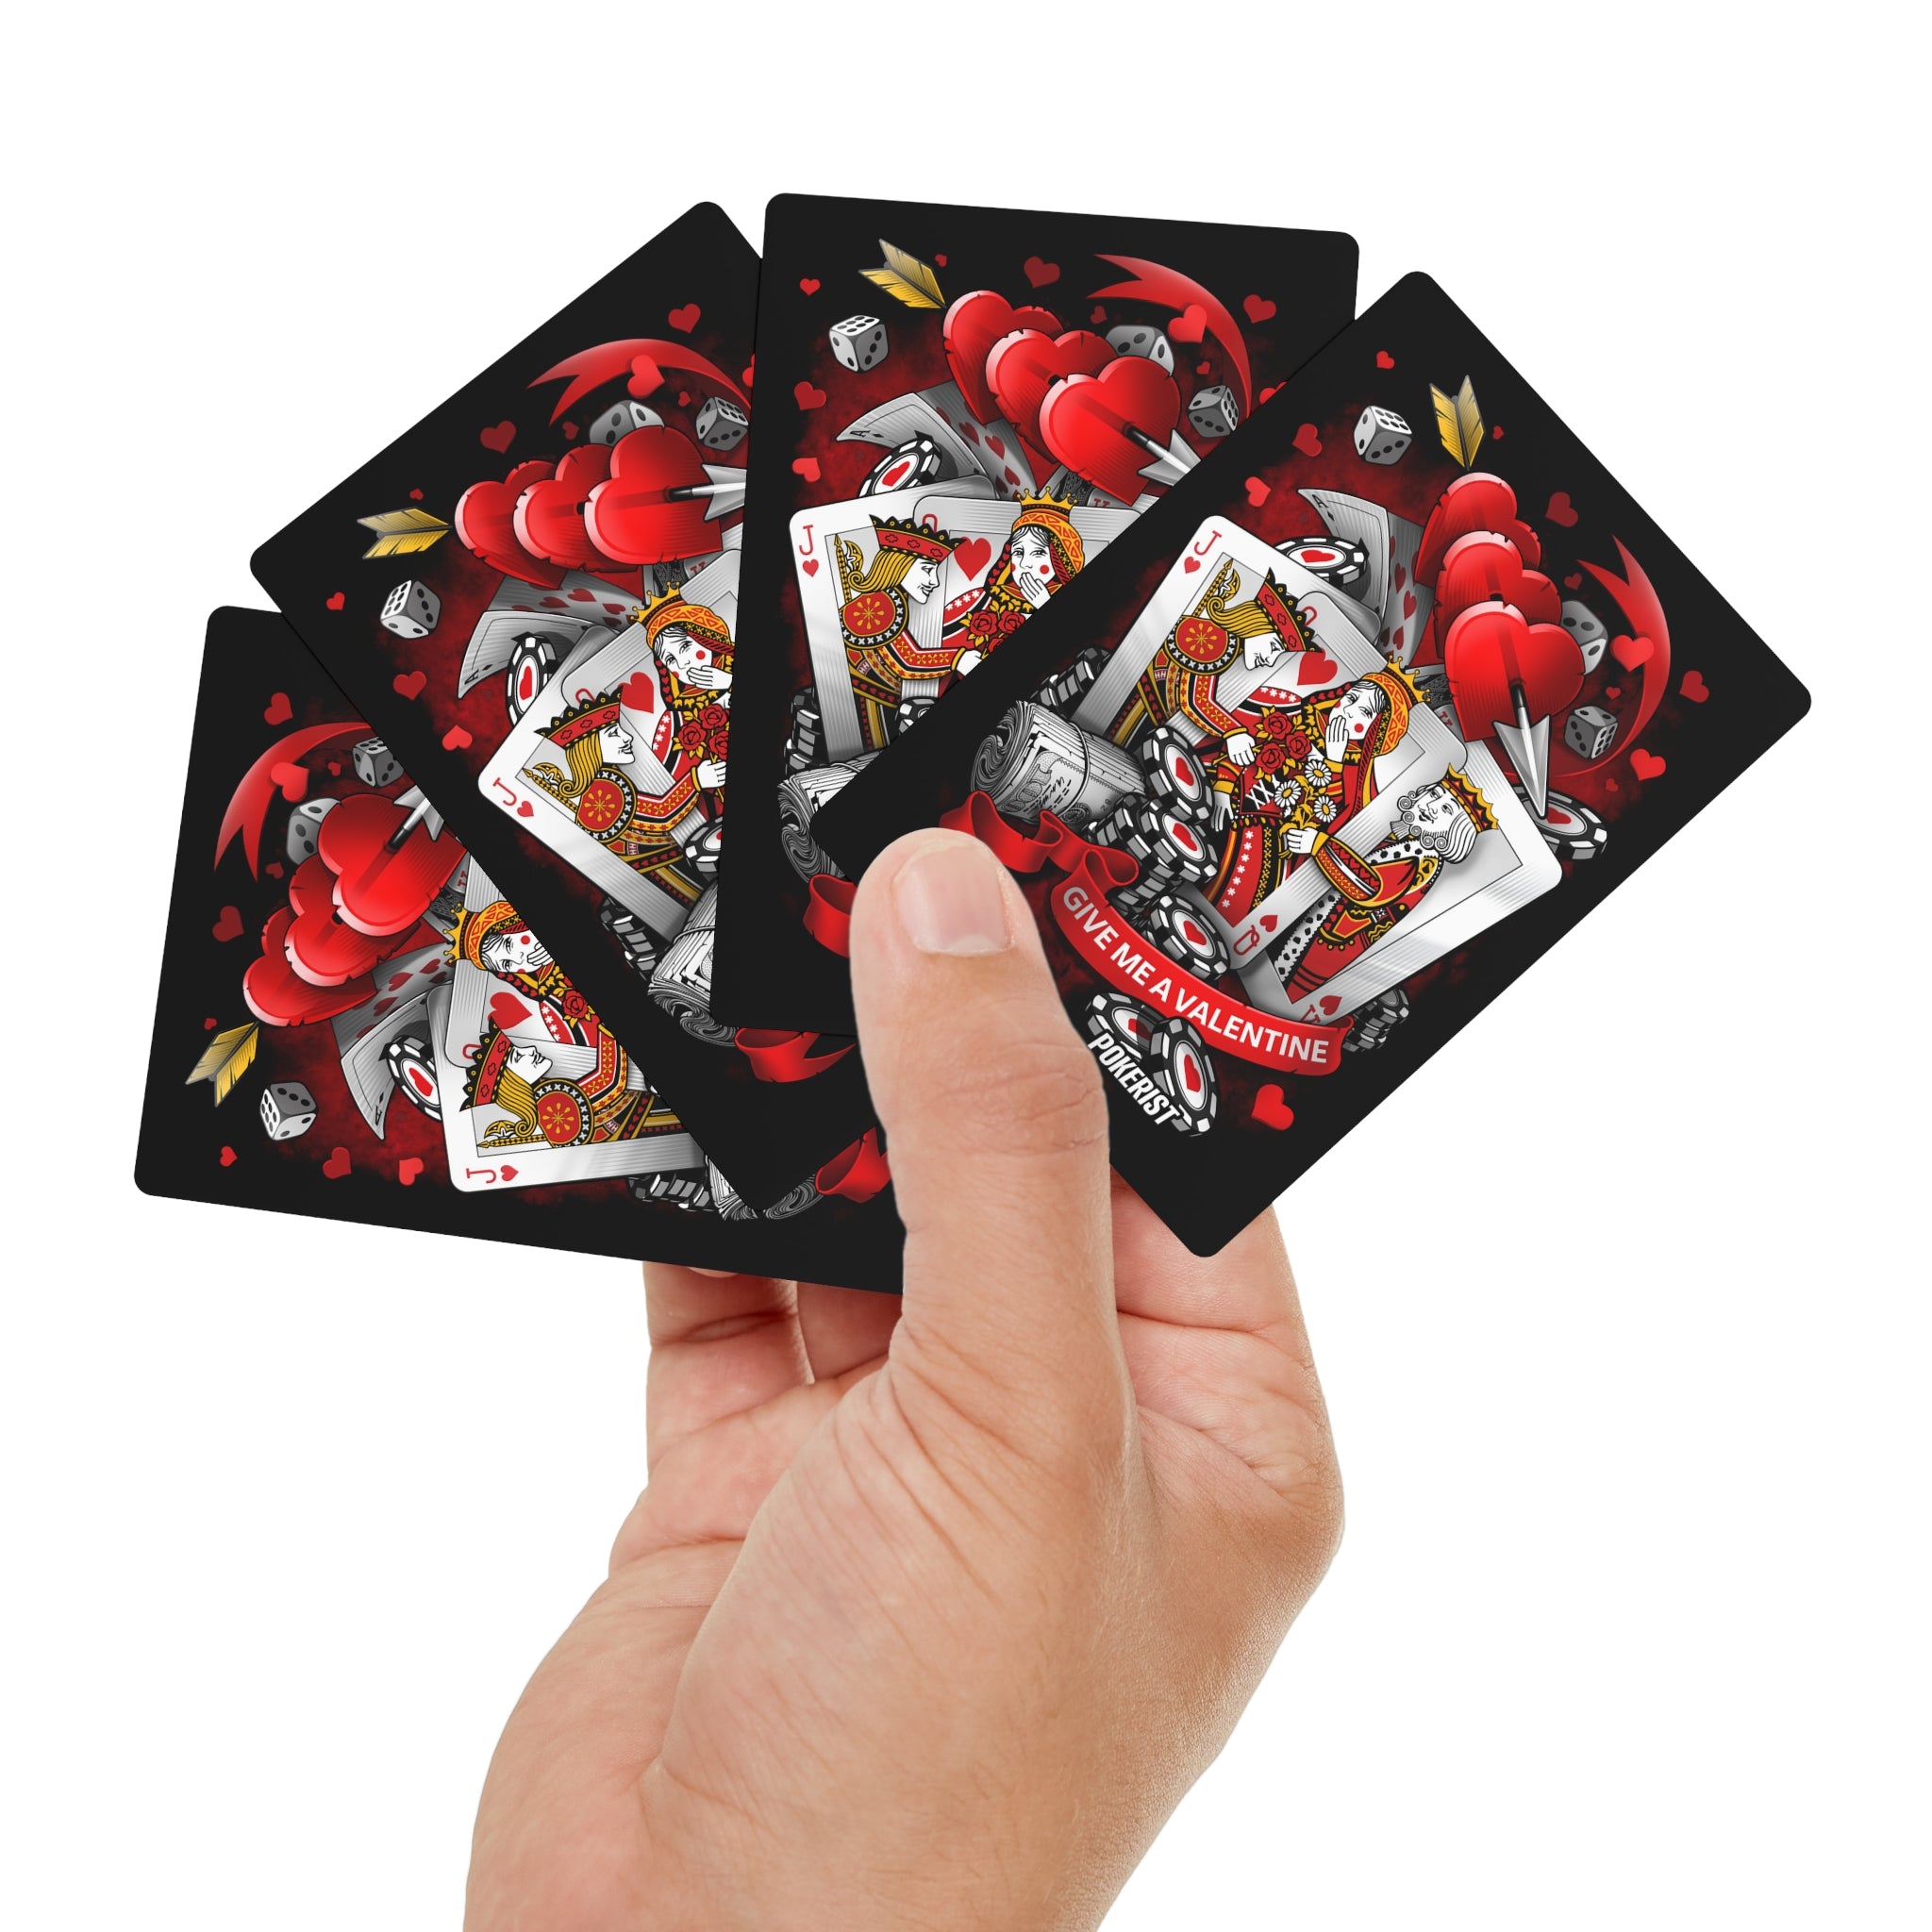 Give me a Valentine - Poker Cards